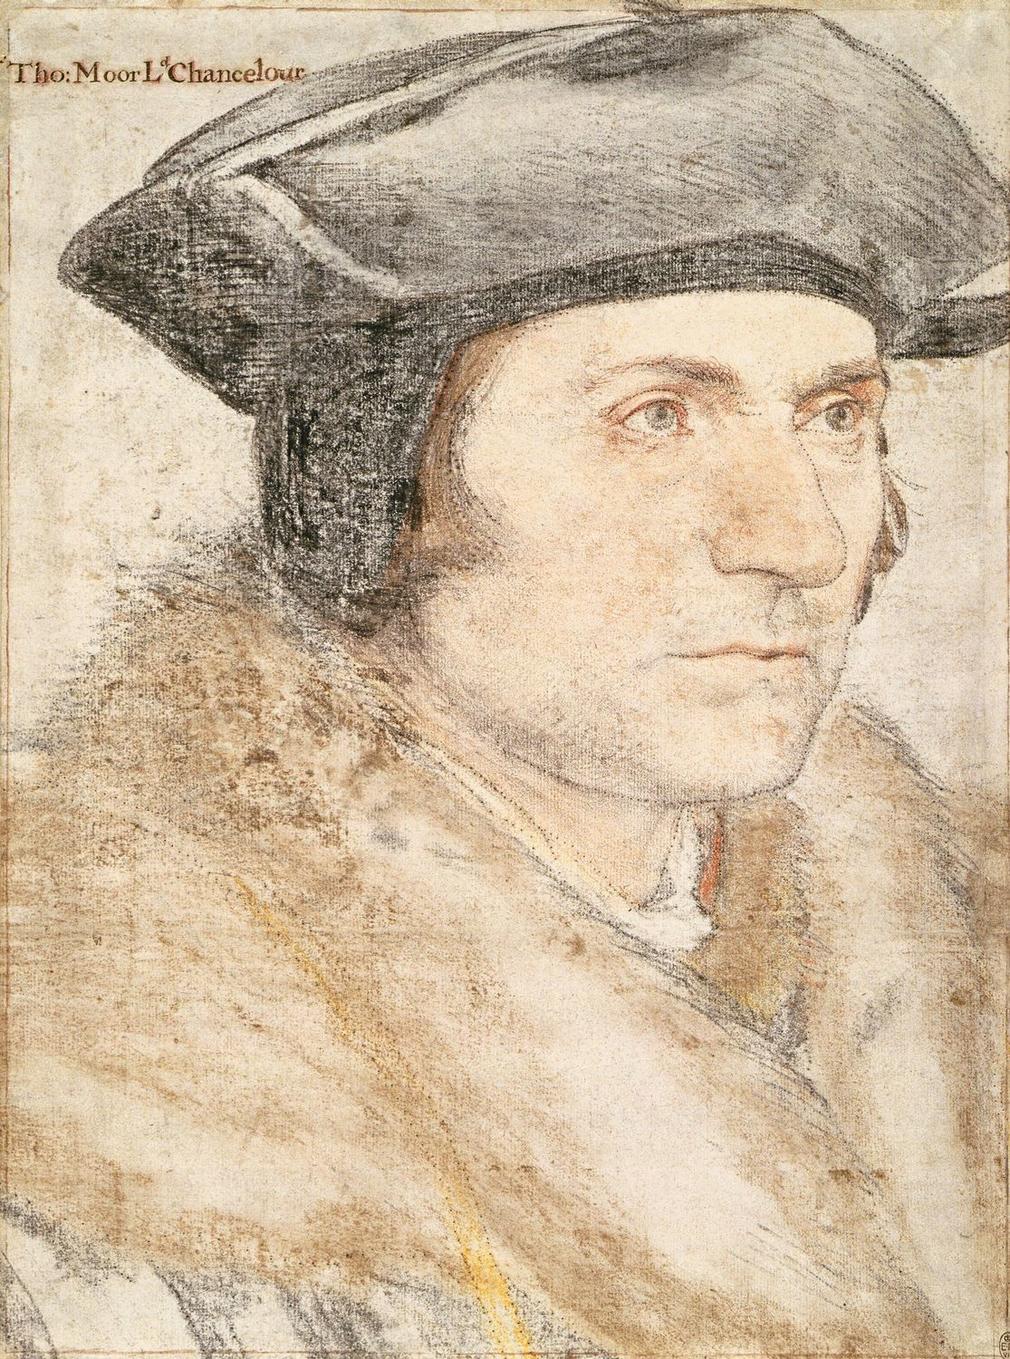 A portrait drawing of Sir Thomas More (1478-1535) The portrait shows his head and shoulders and the sitter faces three-quarters to the right. He wears a hat and fur collar. The drawing has been pricked for transfer. Inscribed in an eighteenth-century hand